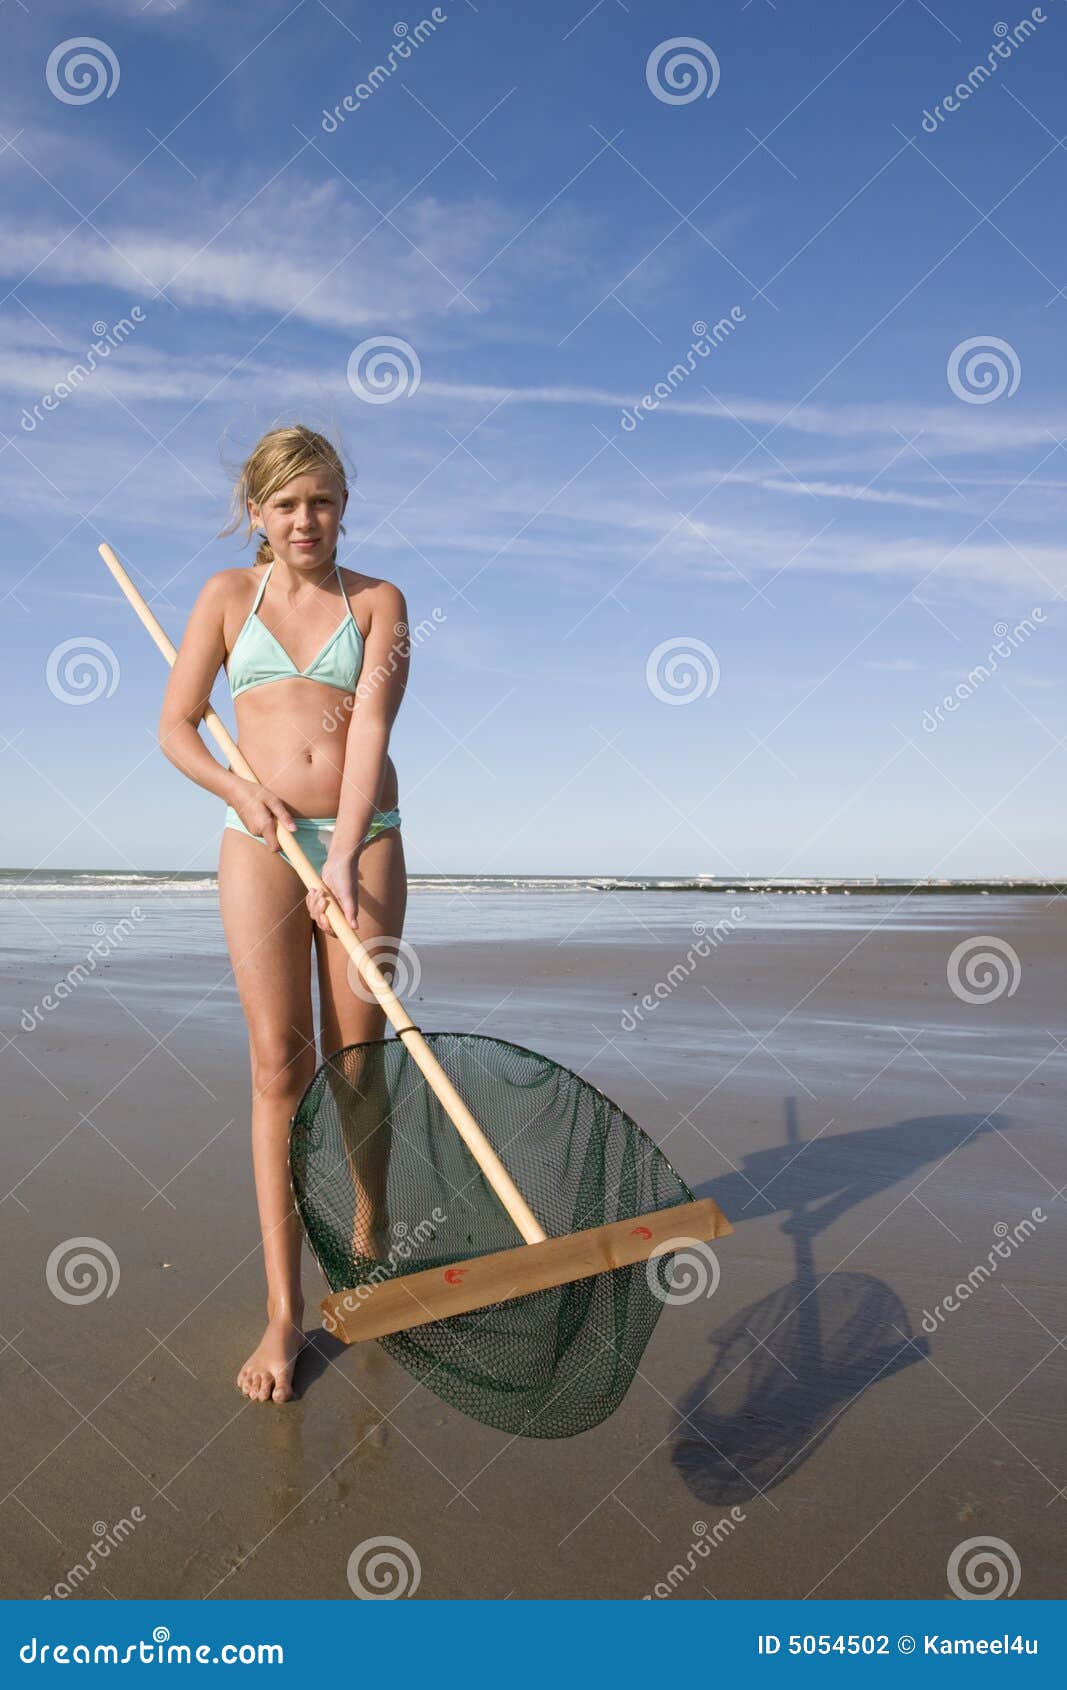 Girl Showing Her Fishing Net at the Beach Stock Photo - Image of